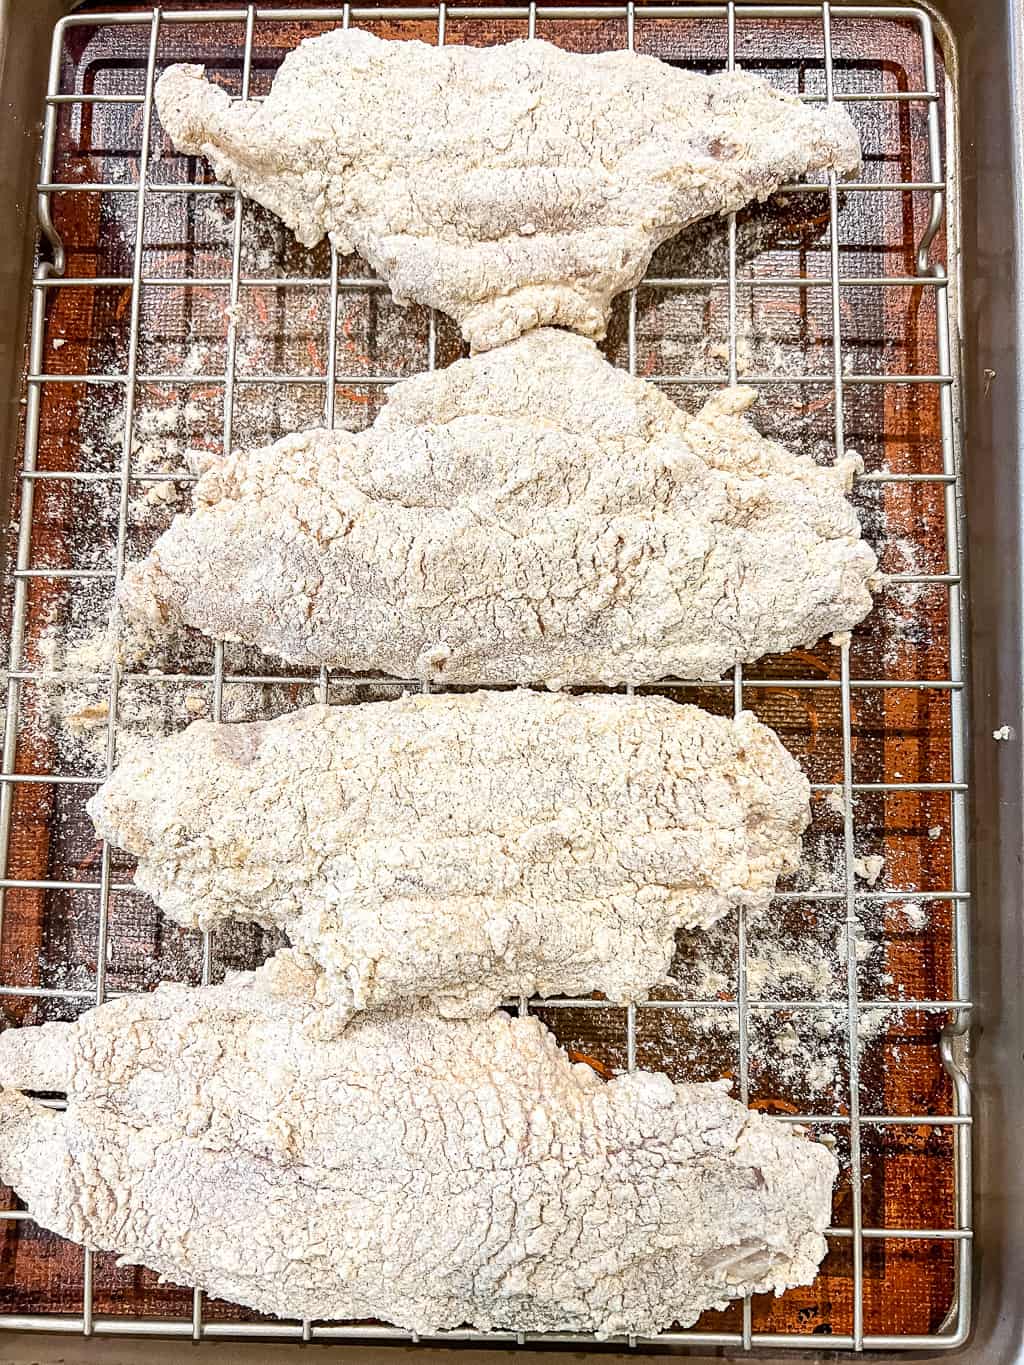 breaded catfish sitting on a cooling rack before frying